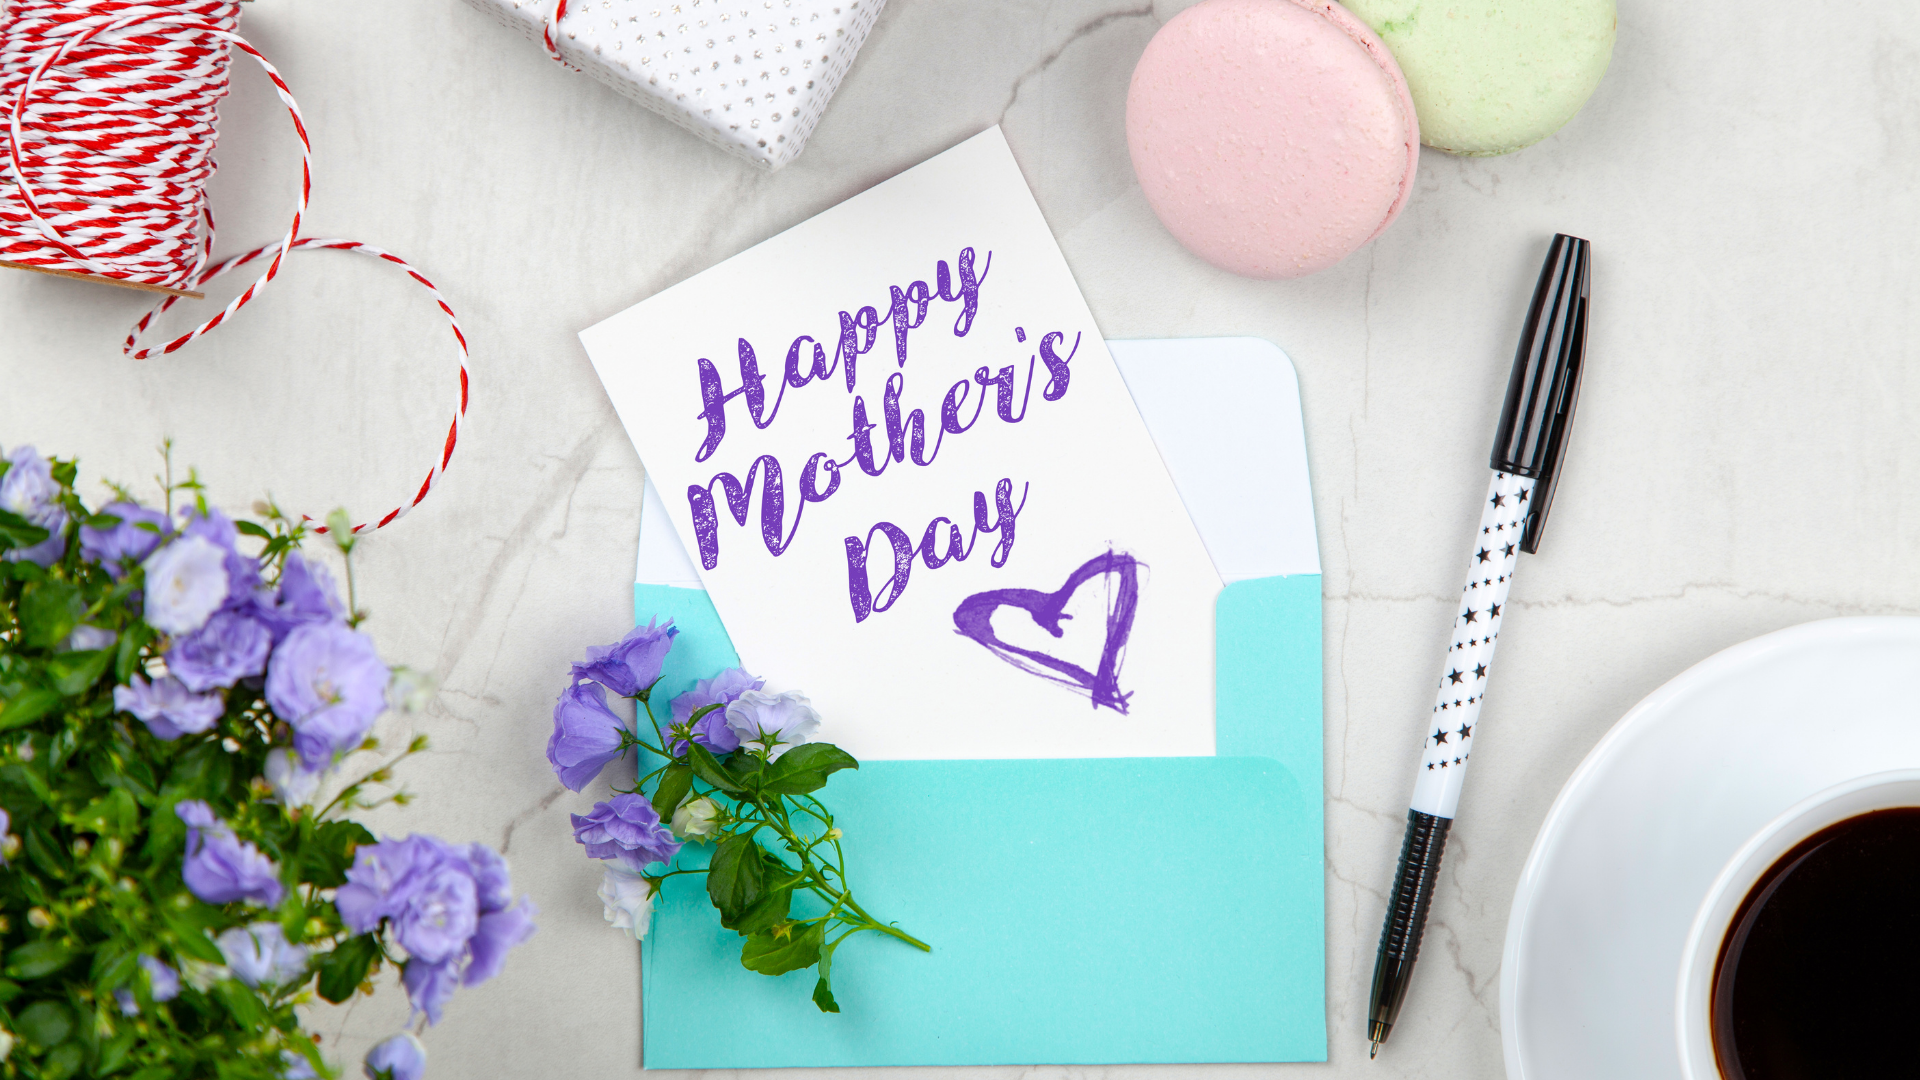 Happy mother's day written on notecard, surrounded by flowers, string, a pen and macarons